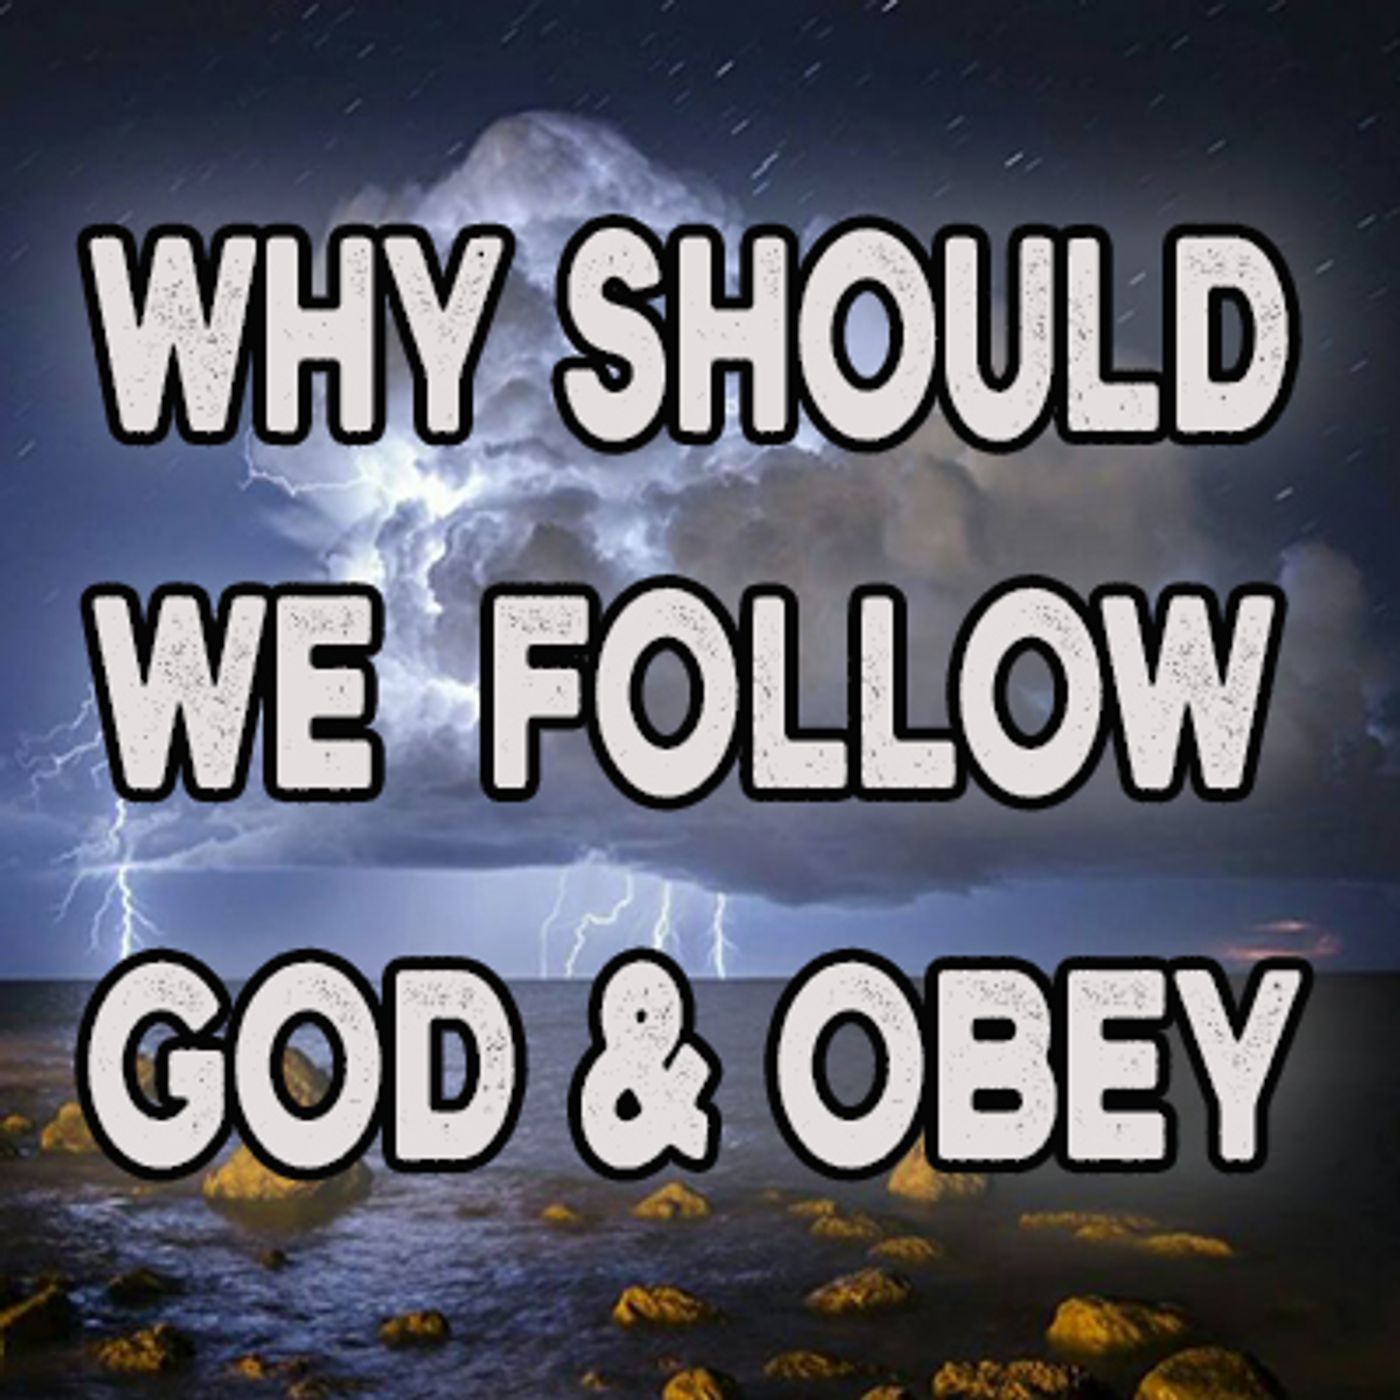 Why Should We Follow God & Obey (Part 2)